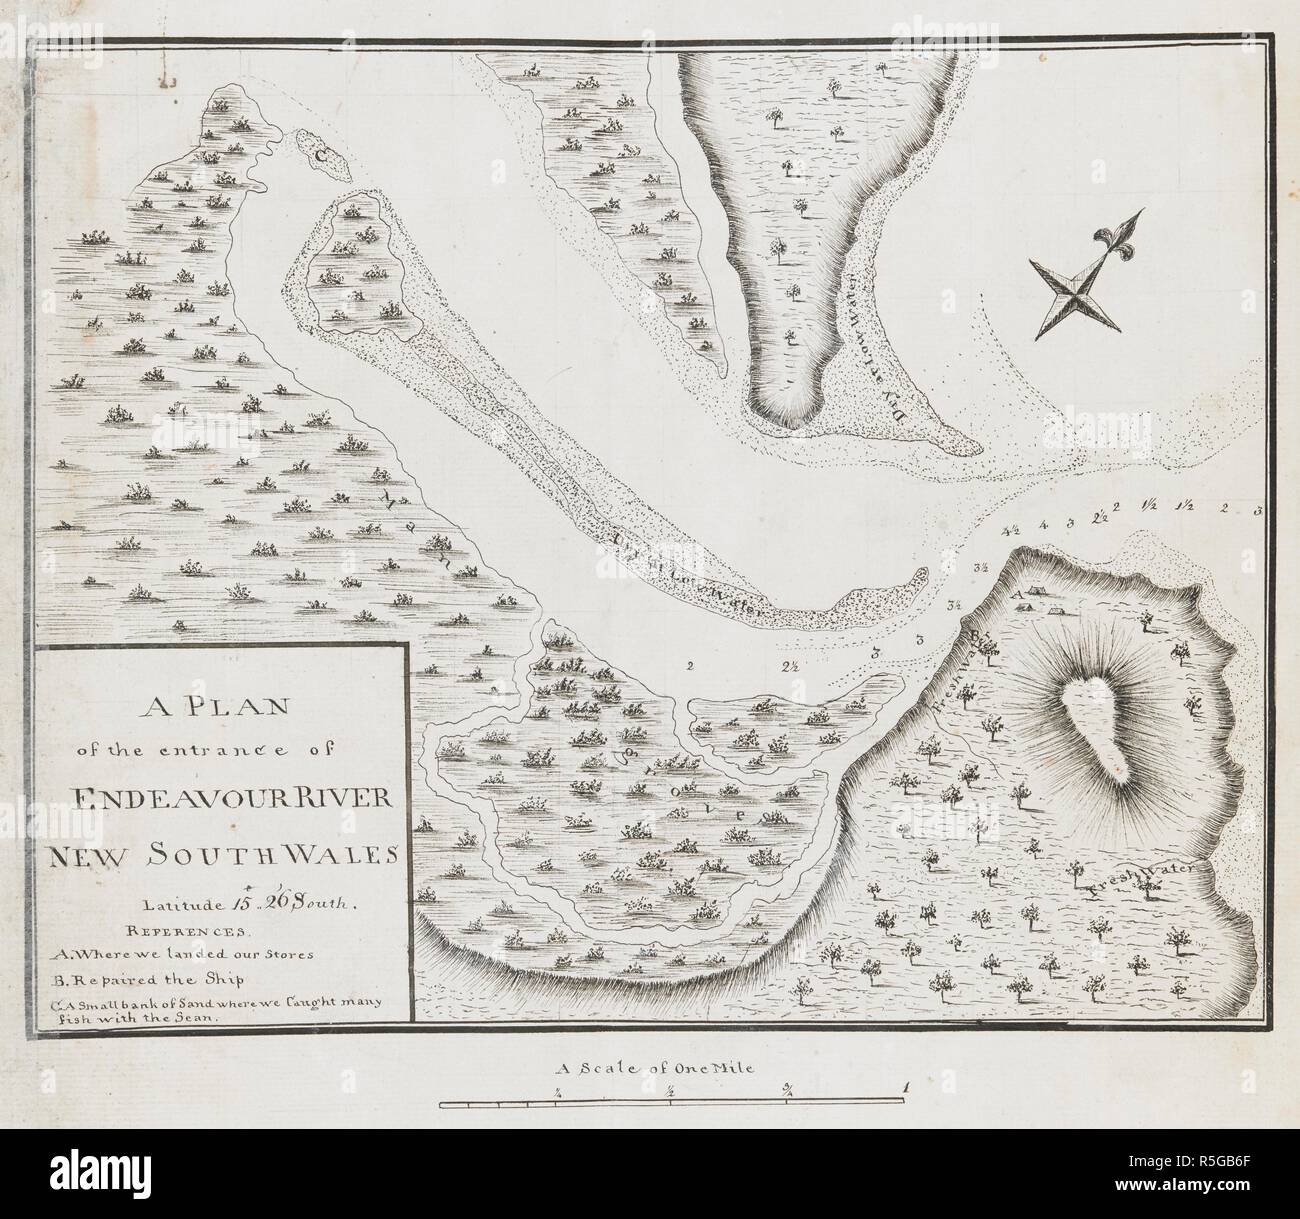 A plan of the entrance of Endeavour River, in New South Wales; drawn by Lieut. James Cook, on a scale of 4 1/2 inches to a mile. Charts, Plans, Views, and Drawings taken on board the Endeavour during Captain Cook's First Voyage, 1768-1771. 1770. Ms. 1 f. x 9 1/2 in.; 30 x 24 cm.; Scale 1: 14 080. 4 1/2 inches to a mile. Source: Add. 7085, No.42. Stock Photo